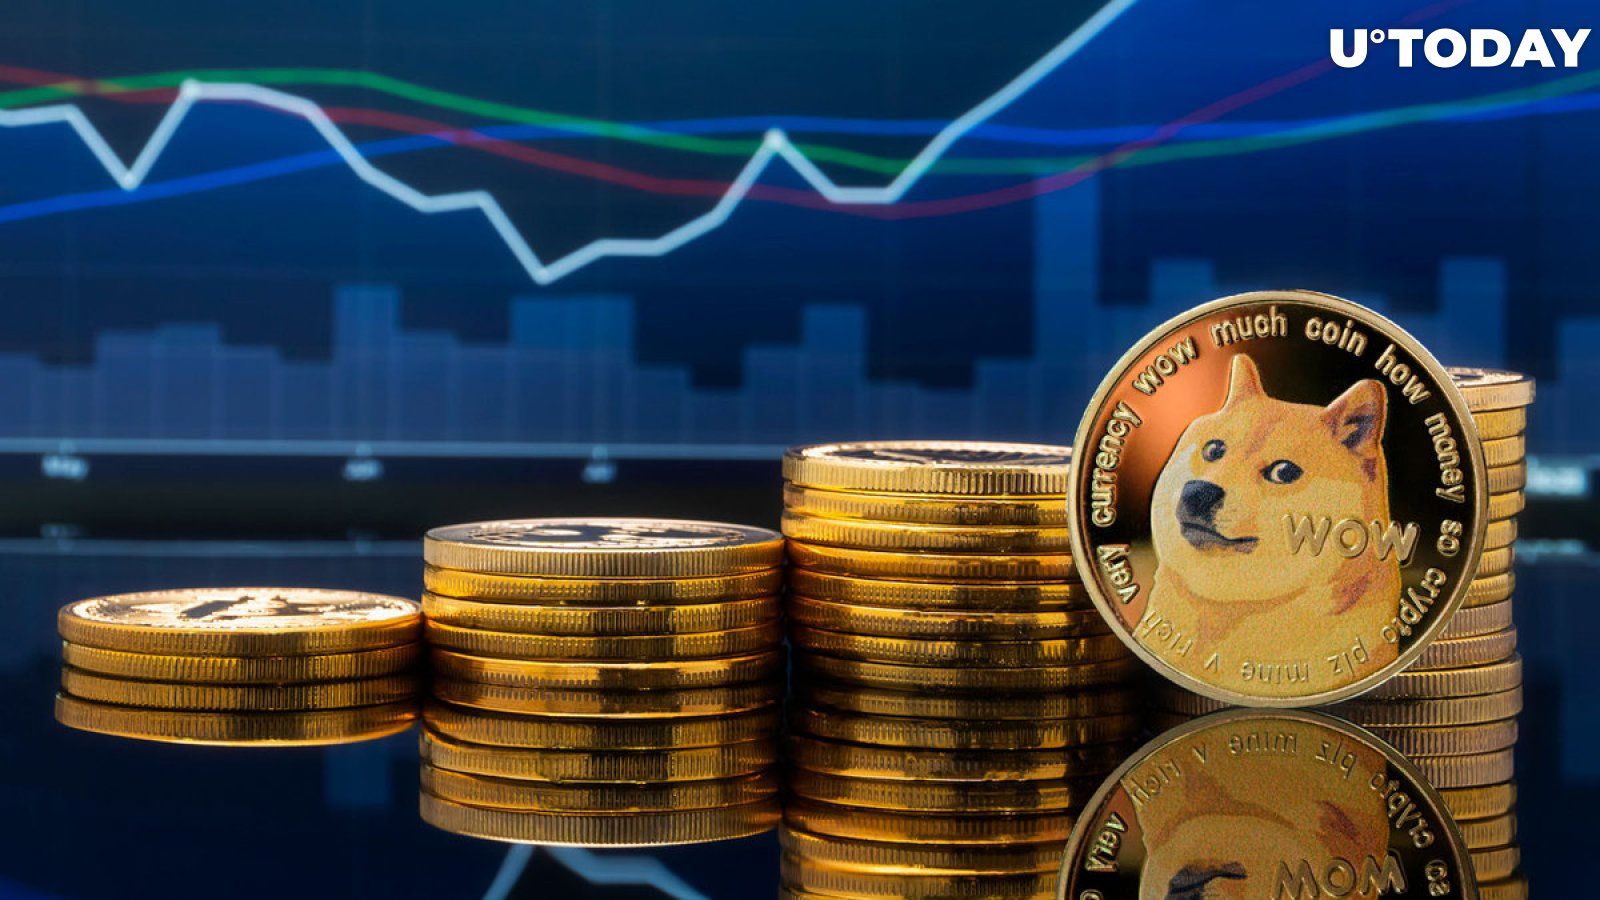 When Dogecoin Hits $1.69, Everyone Will Freak Out, Dogecoin Founder Says